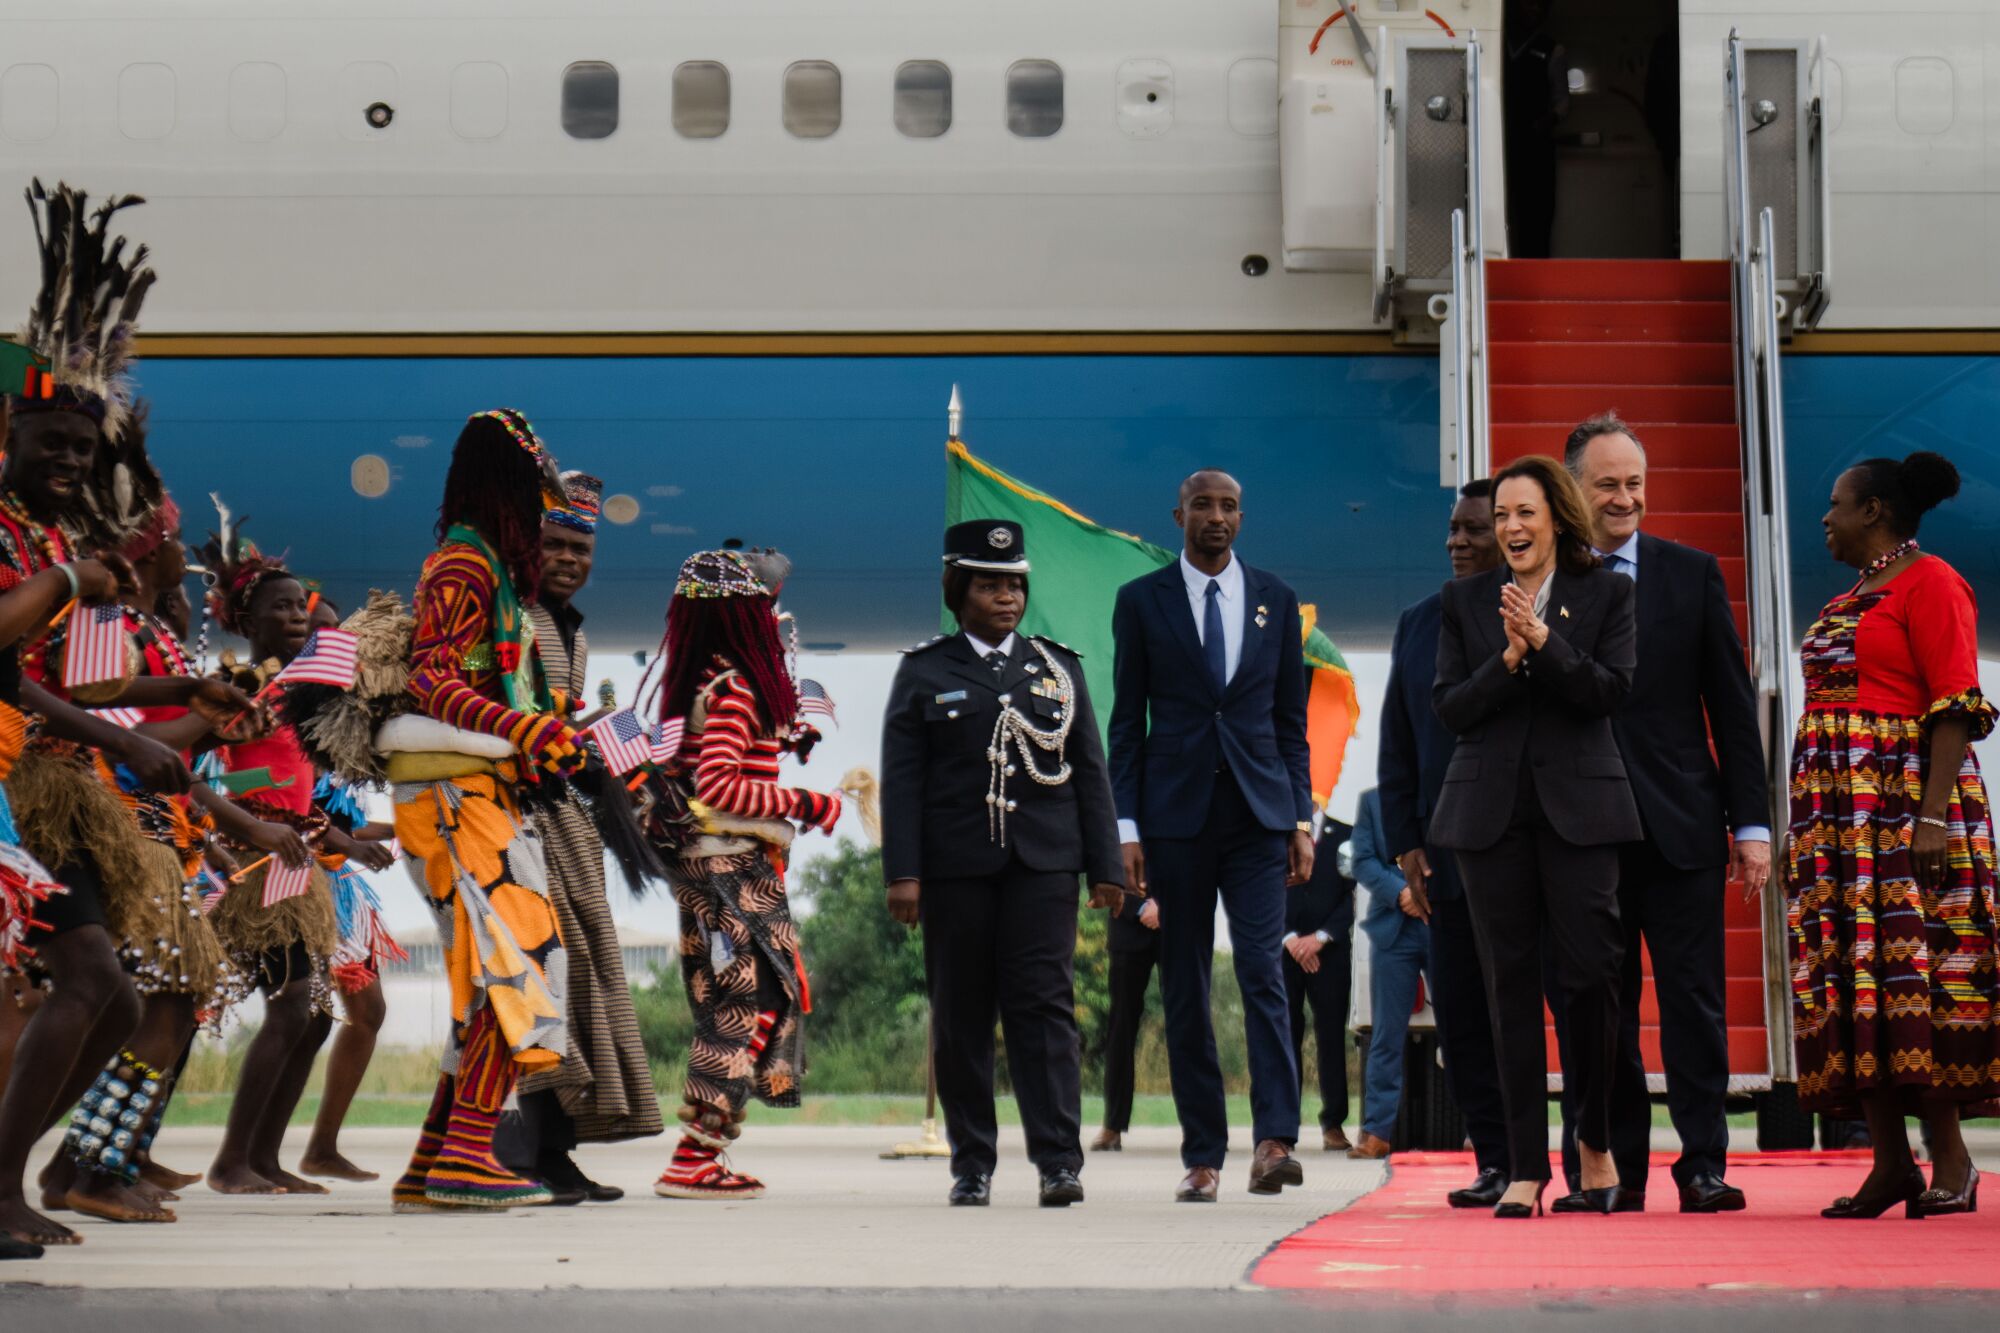 U.S. Vice President Kamala Harris and Second Gentleman Doug Emhoff are welcomed in Zambia.